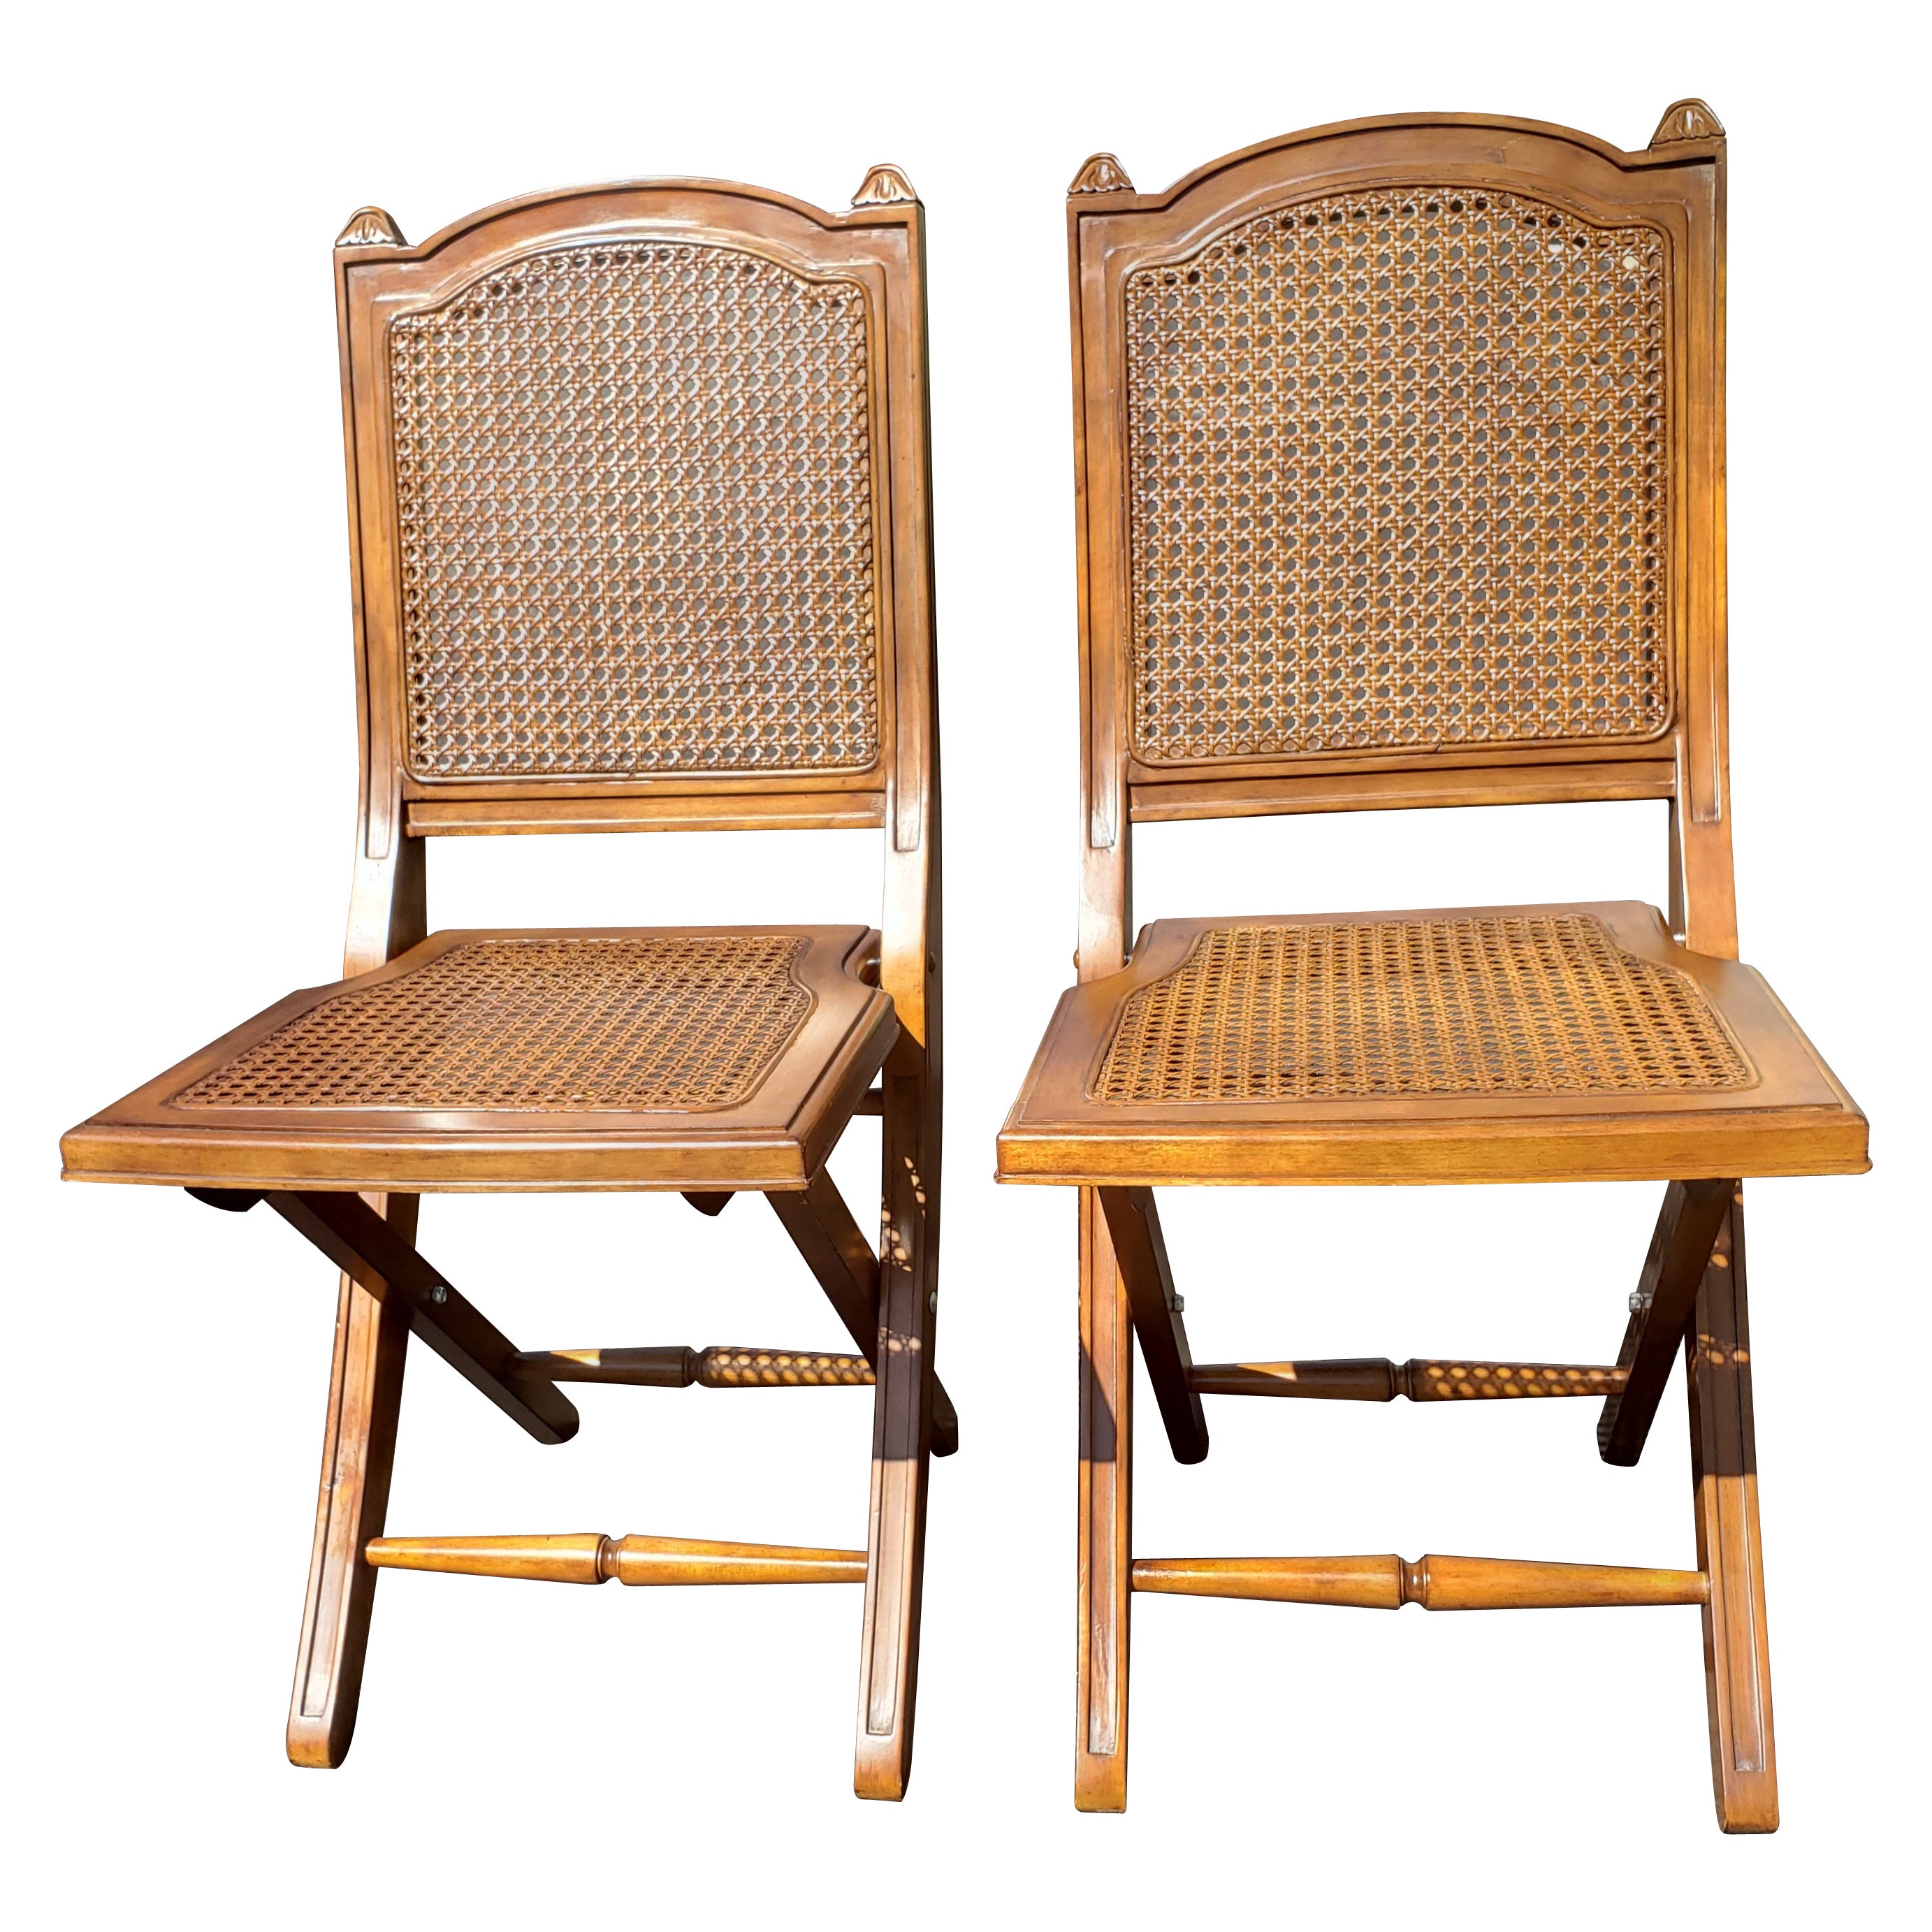 Solid Cherry and Cane Seat and Back Folding Chairs with Cushions, a Pair